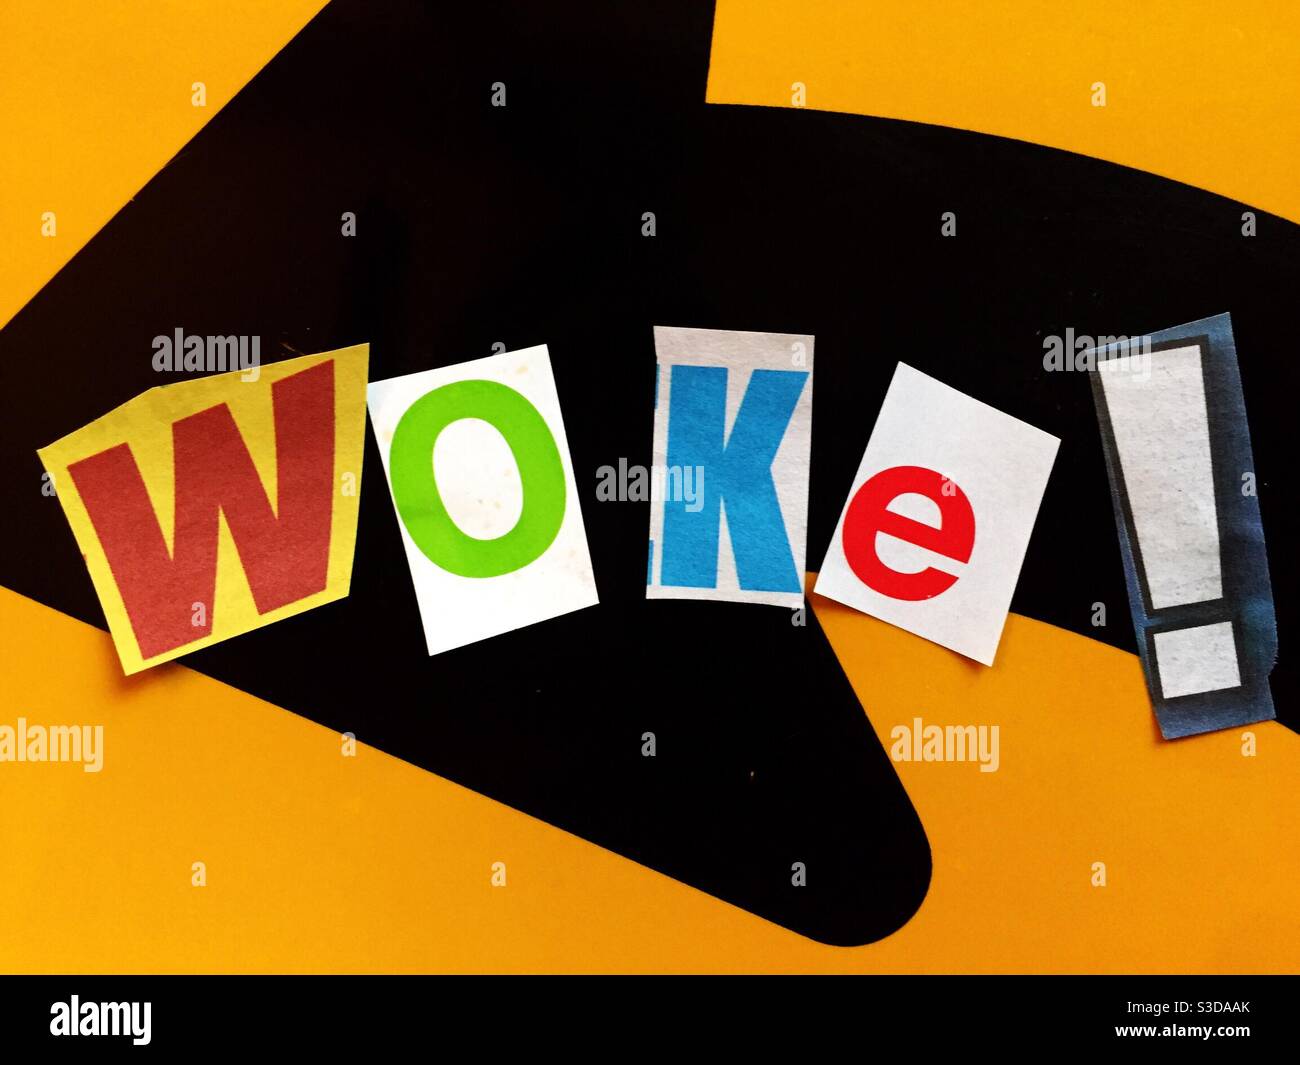 Woke! Spelled out with cut out letters in ransom note typography, USA Stock Photo